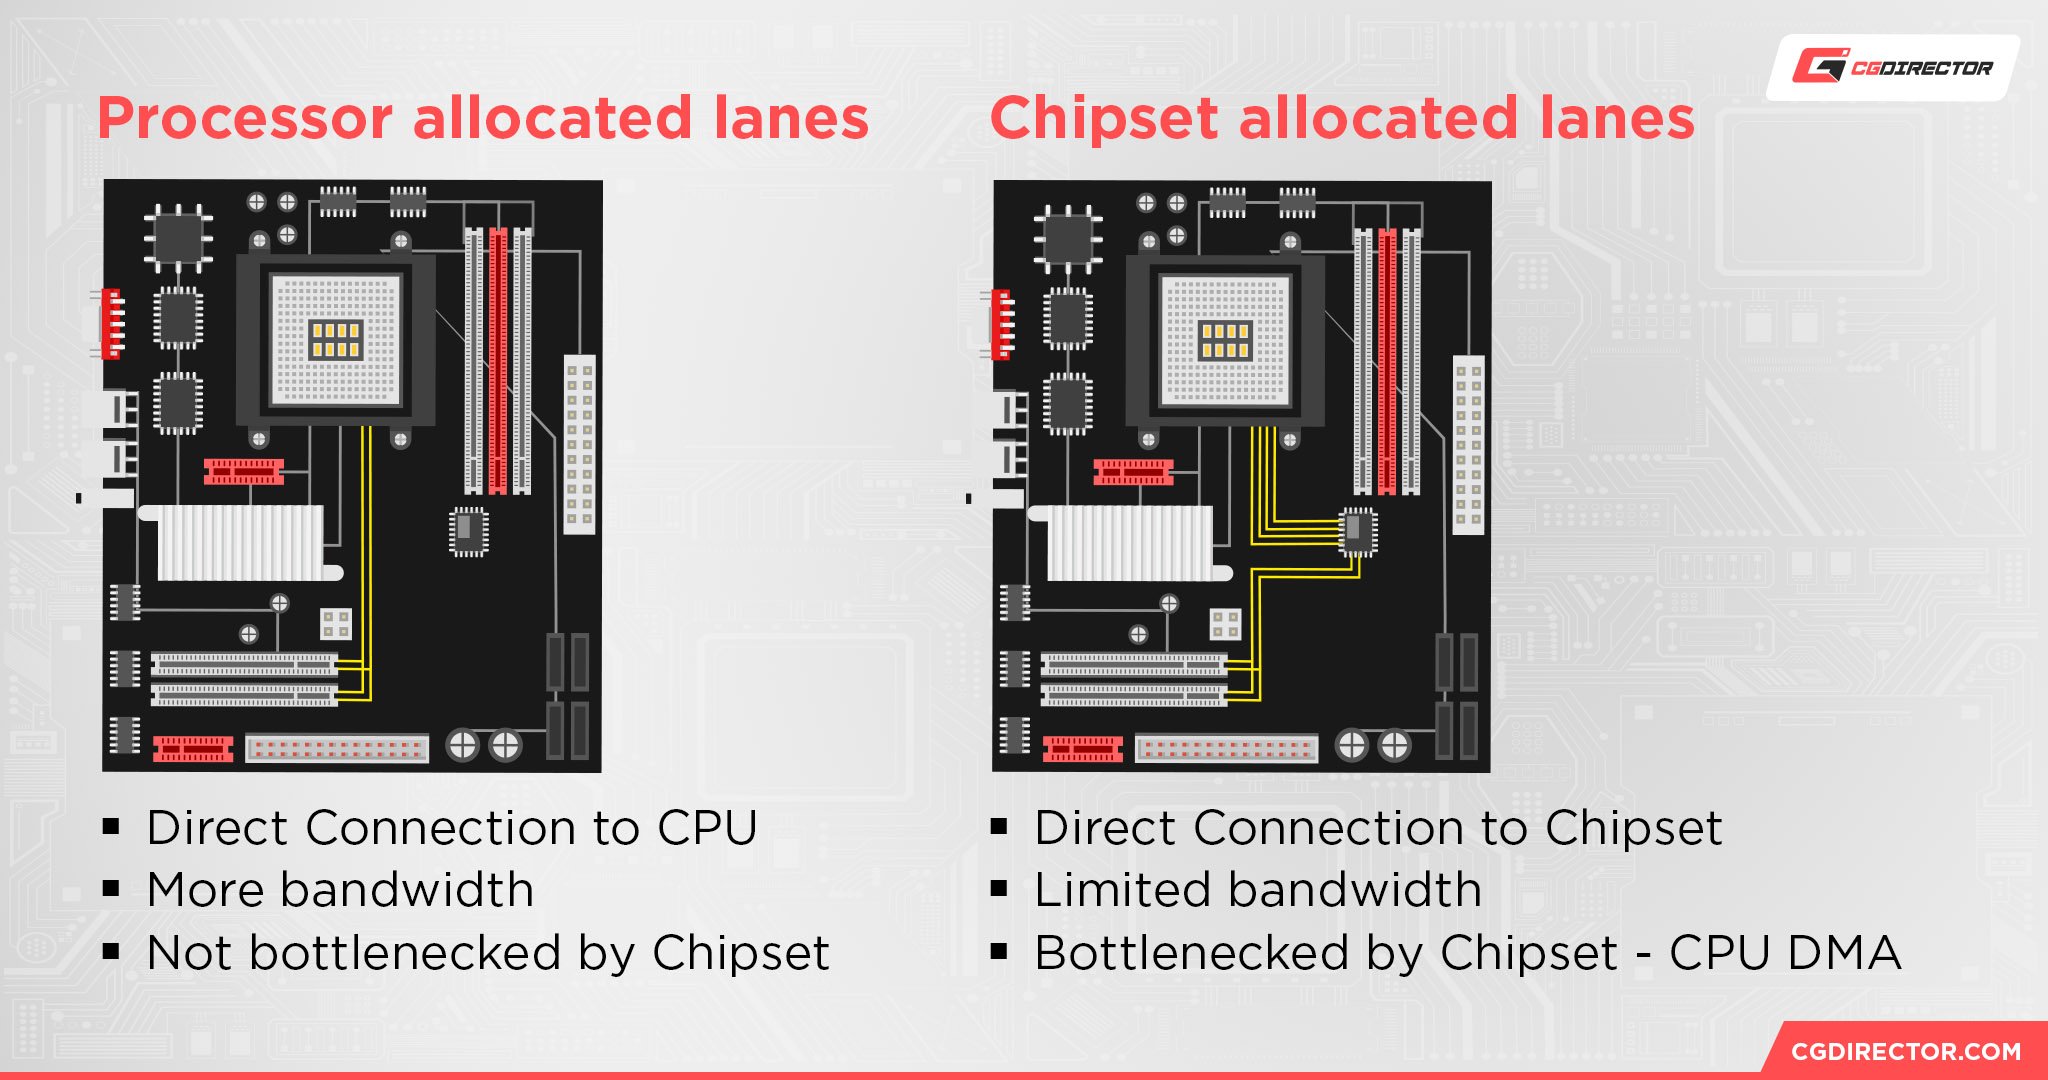 Pro vs chipset allocated lanes